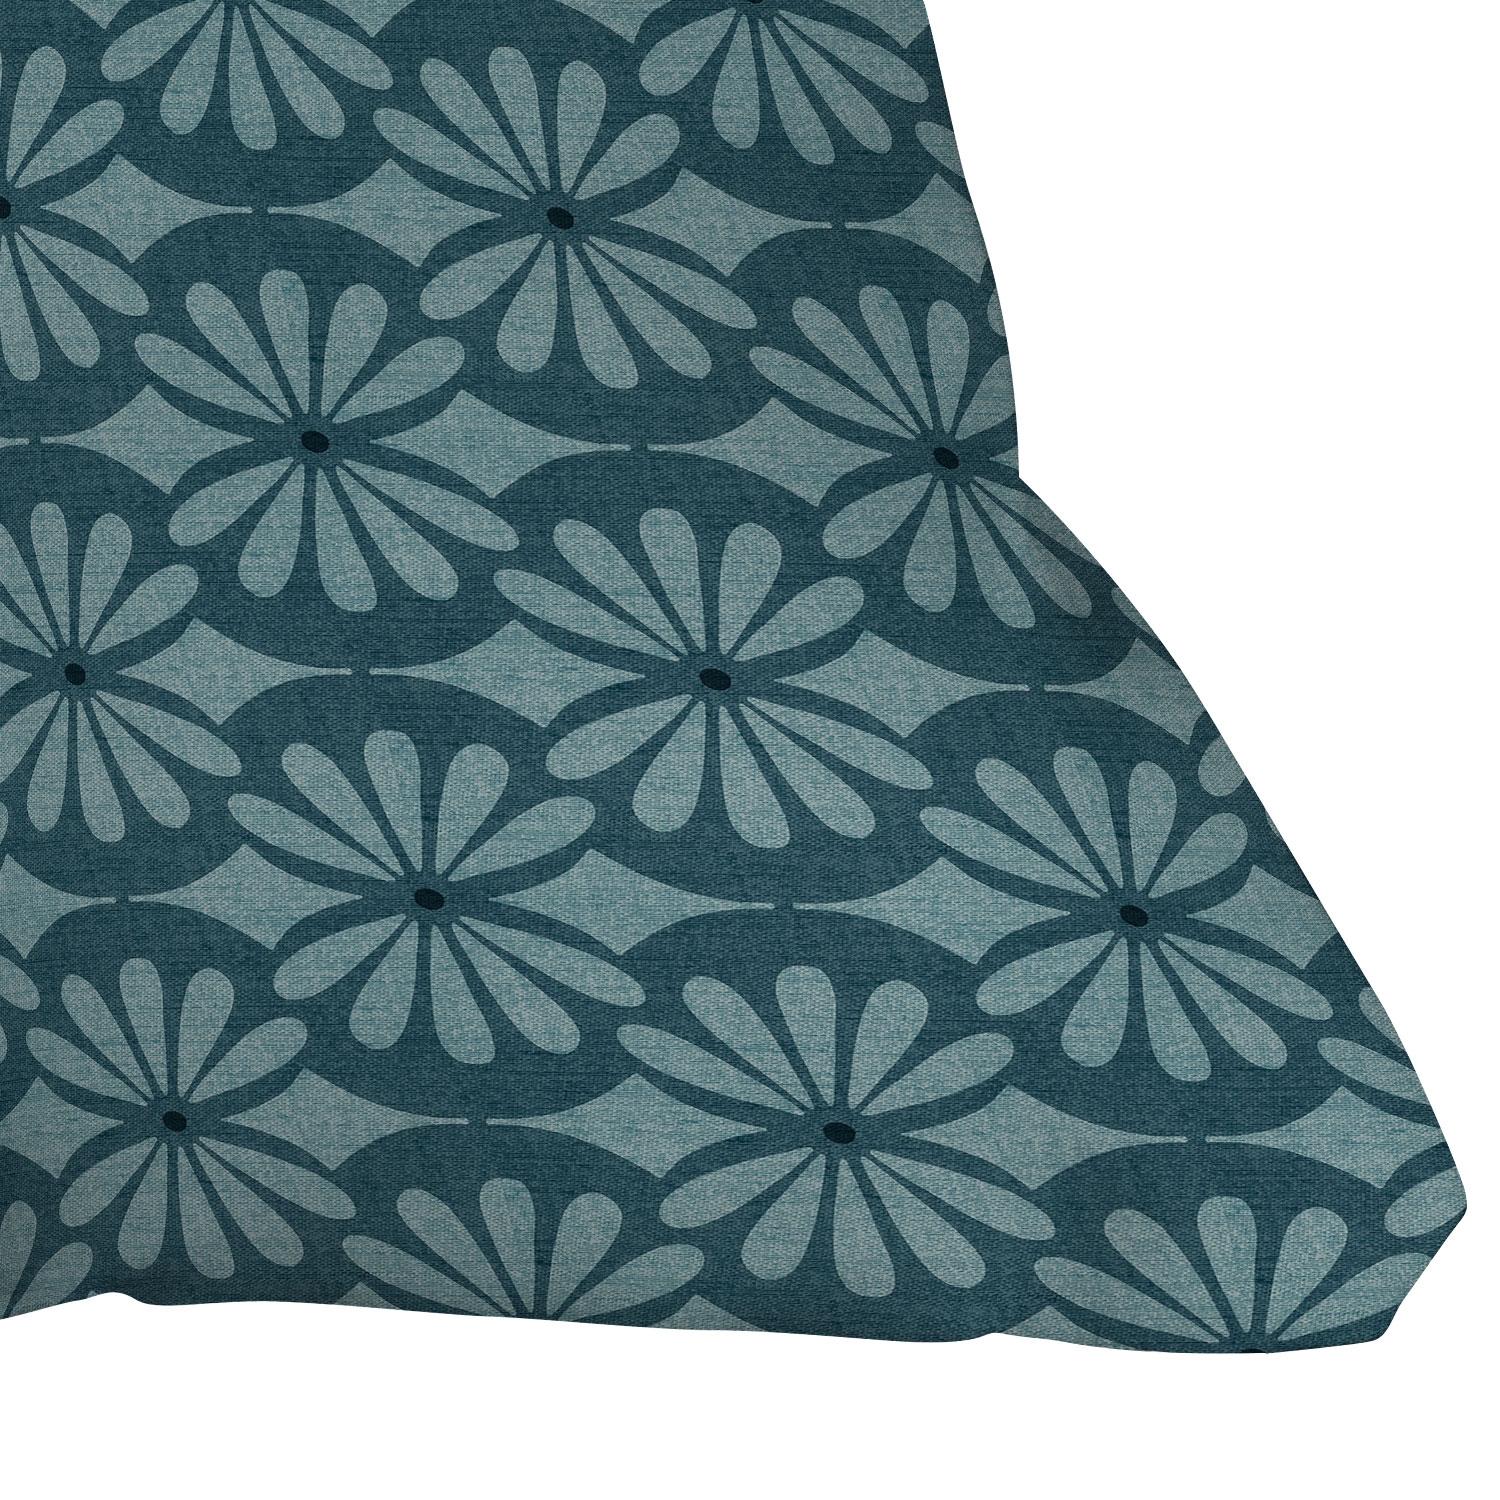 Solstice Teal by Heather Dutton - Outdoor Throw Pillow 20" x 20" - Image 1